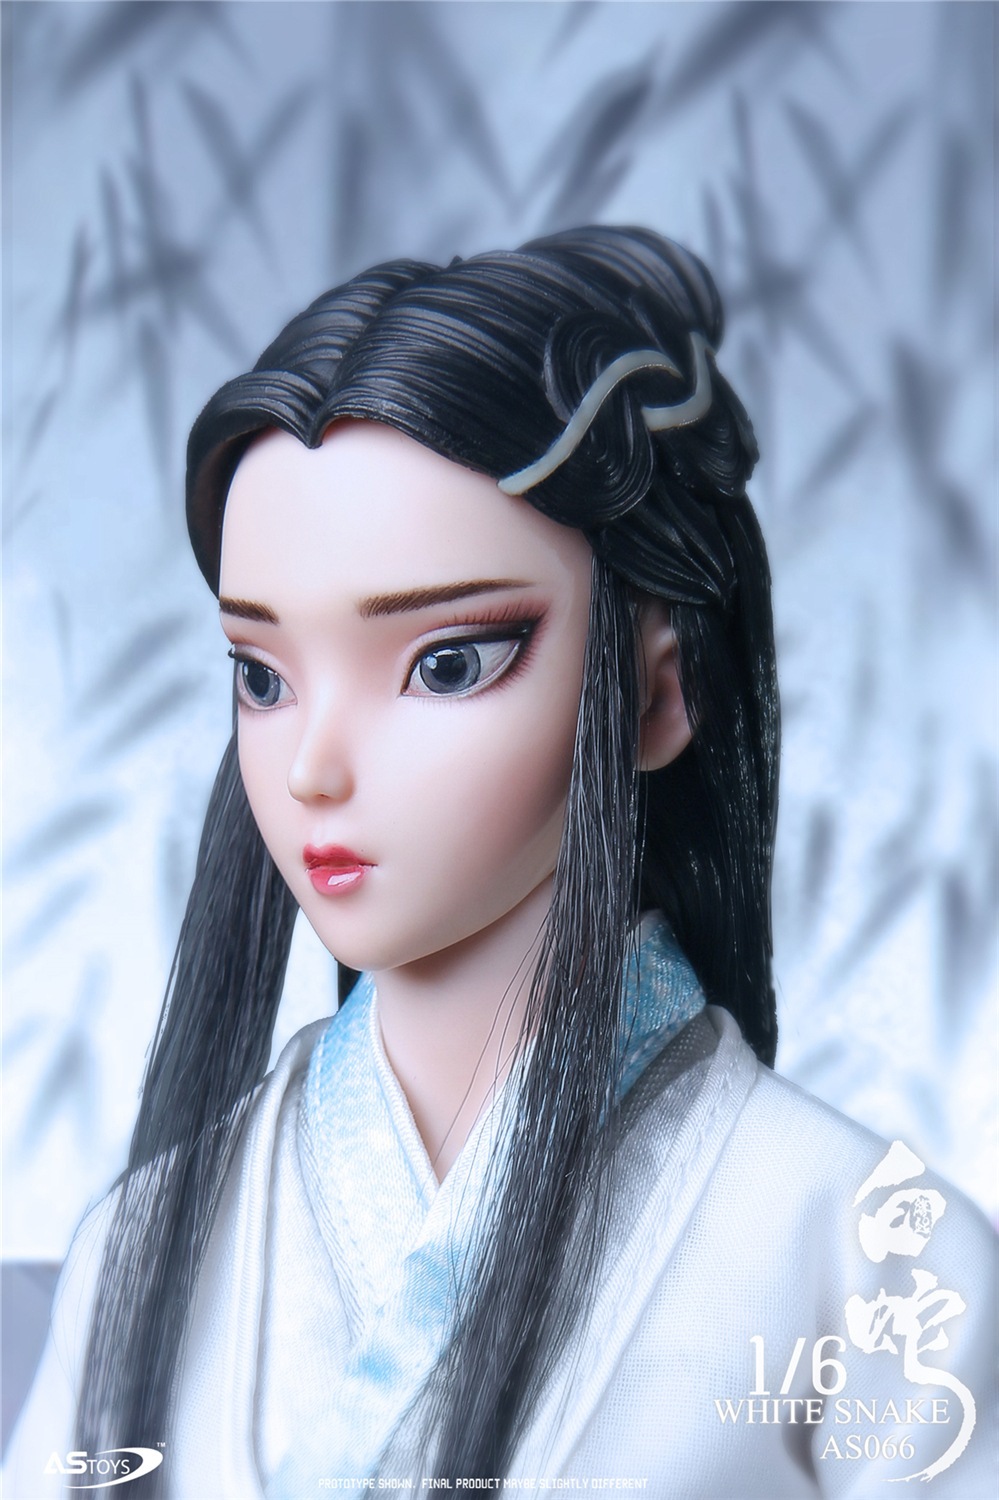 ASTOYS - NEW PRODUCT: ASToys: 1/6 "White Snake" Action Figure #AS066 19104012